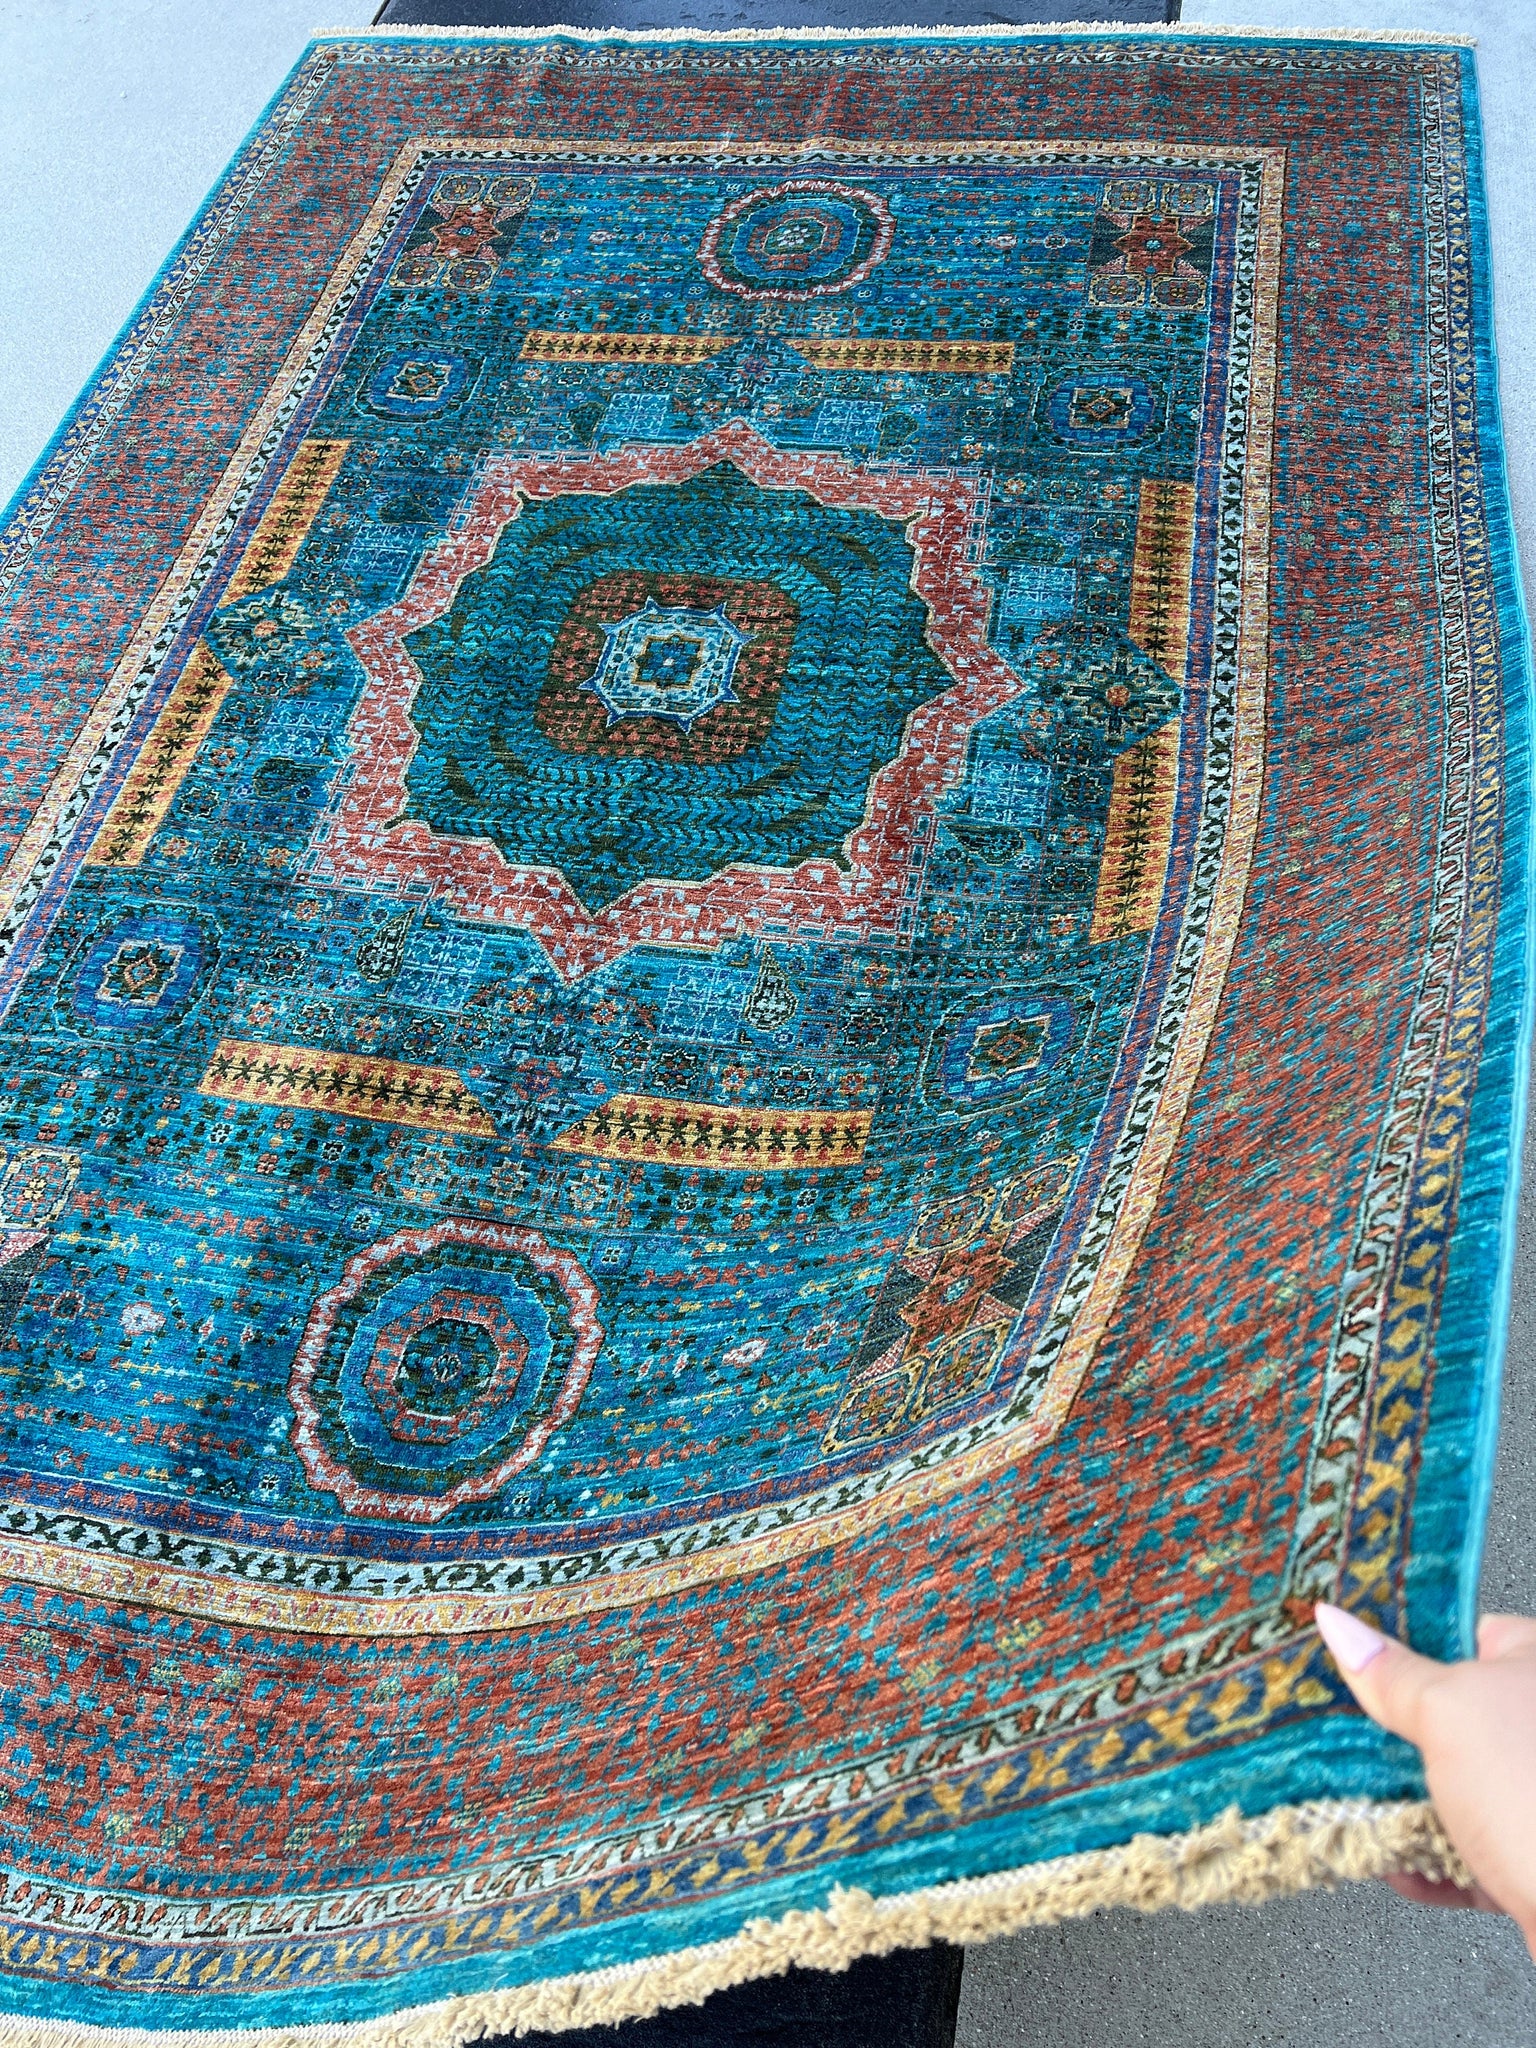 6x8 (180x245) Hand Knotted Afghan Rug |